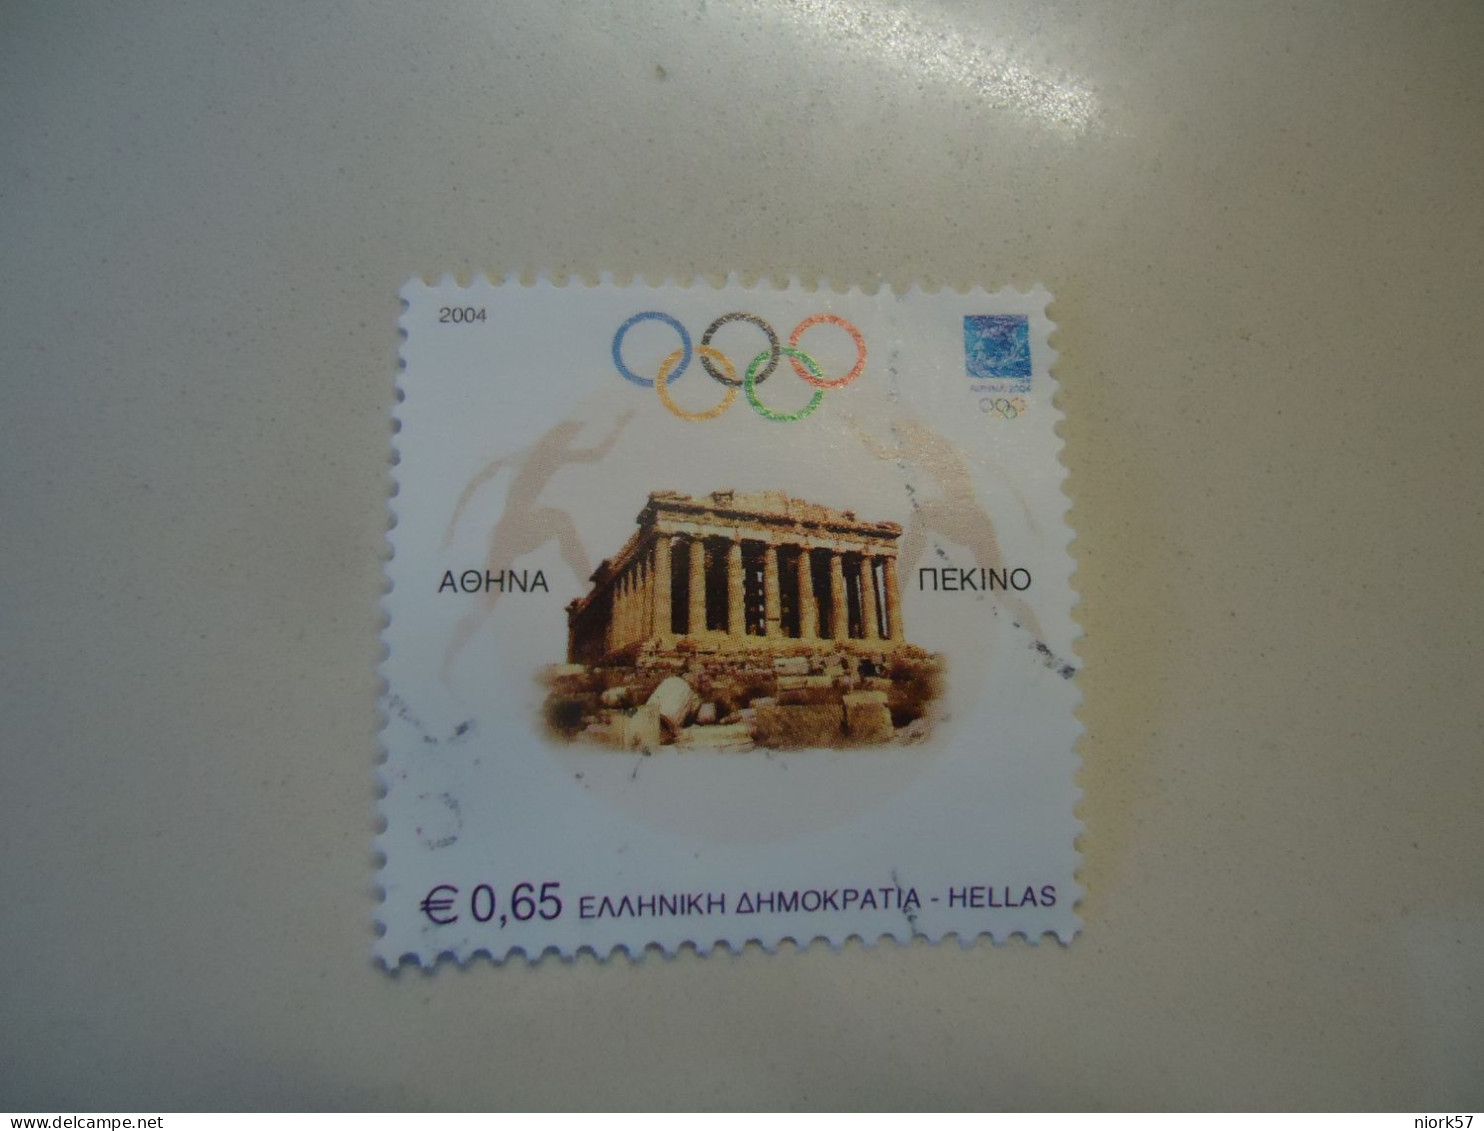 GREECE   USED  STAMPS 2004 OLYMPIC GAMES ATHENS 2004 - Zomer 2004: Athene - Paralympics